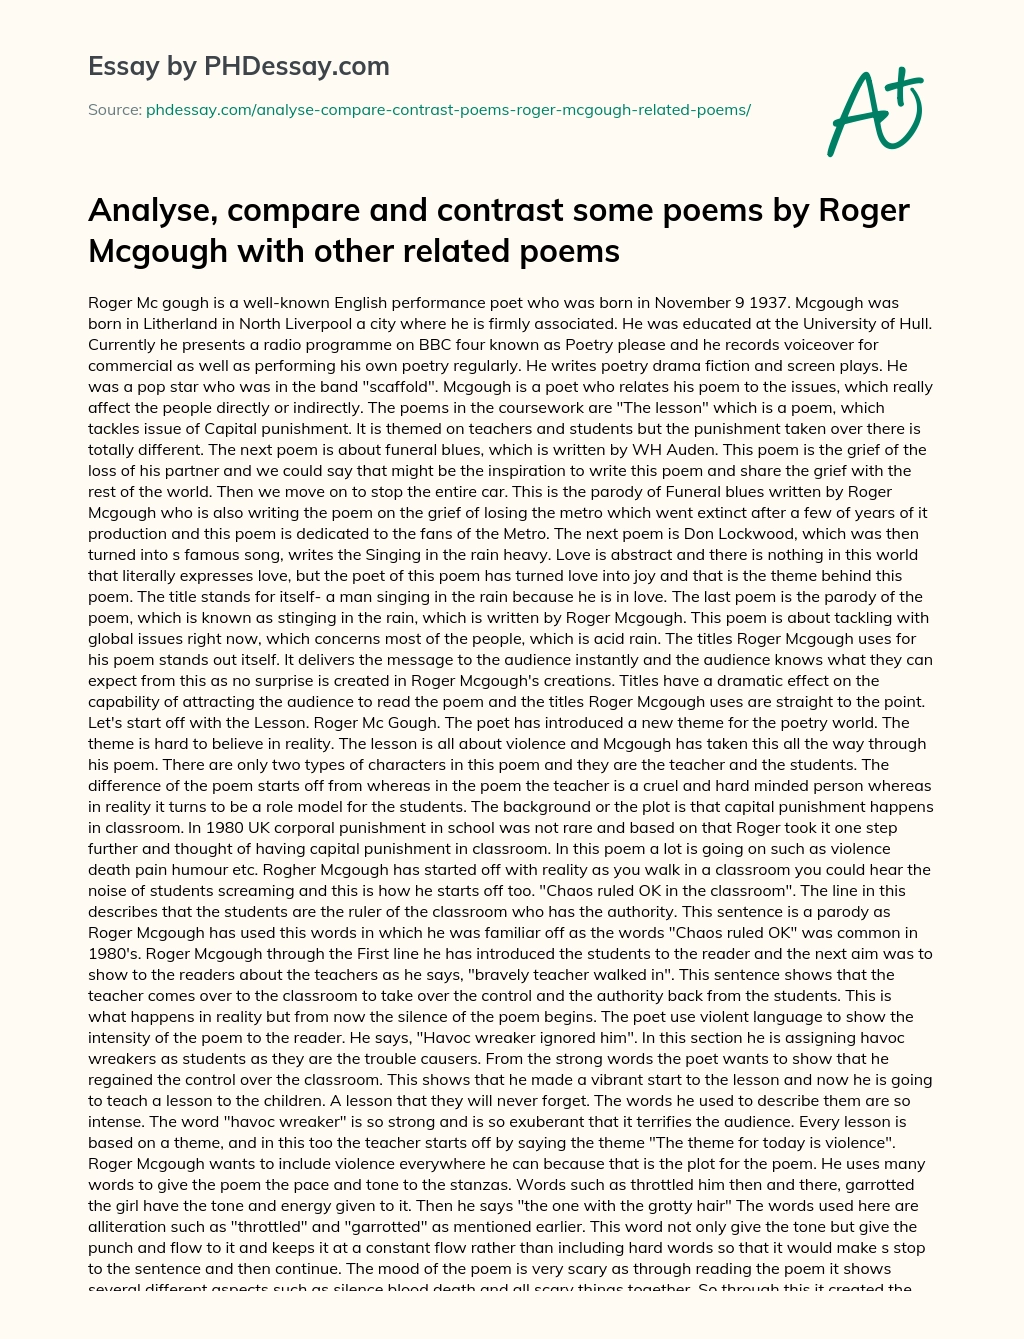 Roger McGough: The Life and Work of a Performance Poet essay